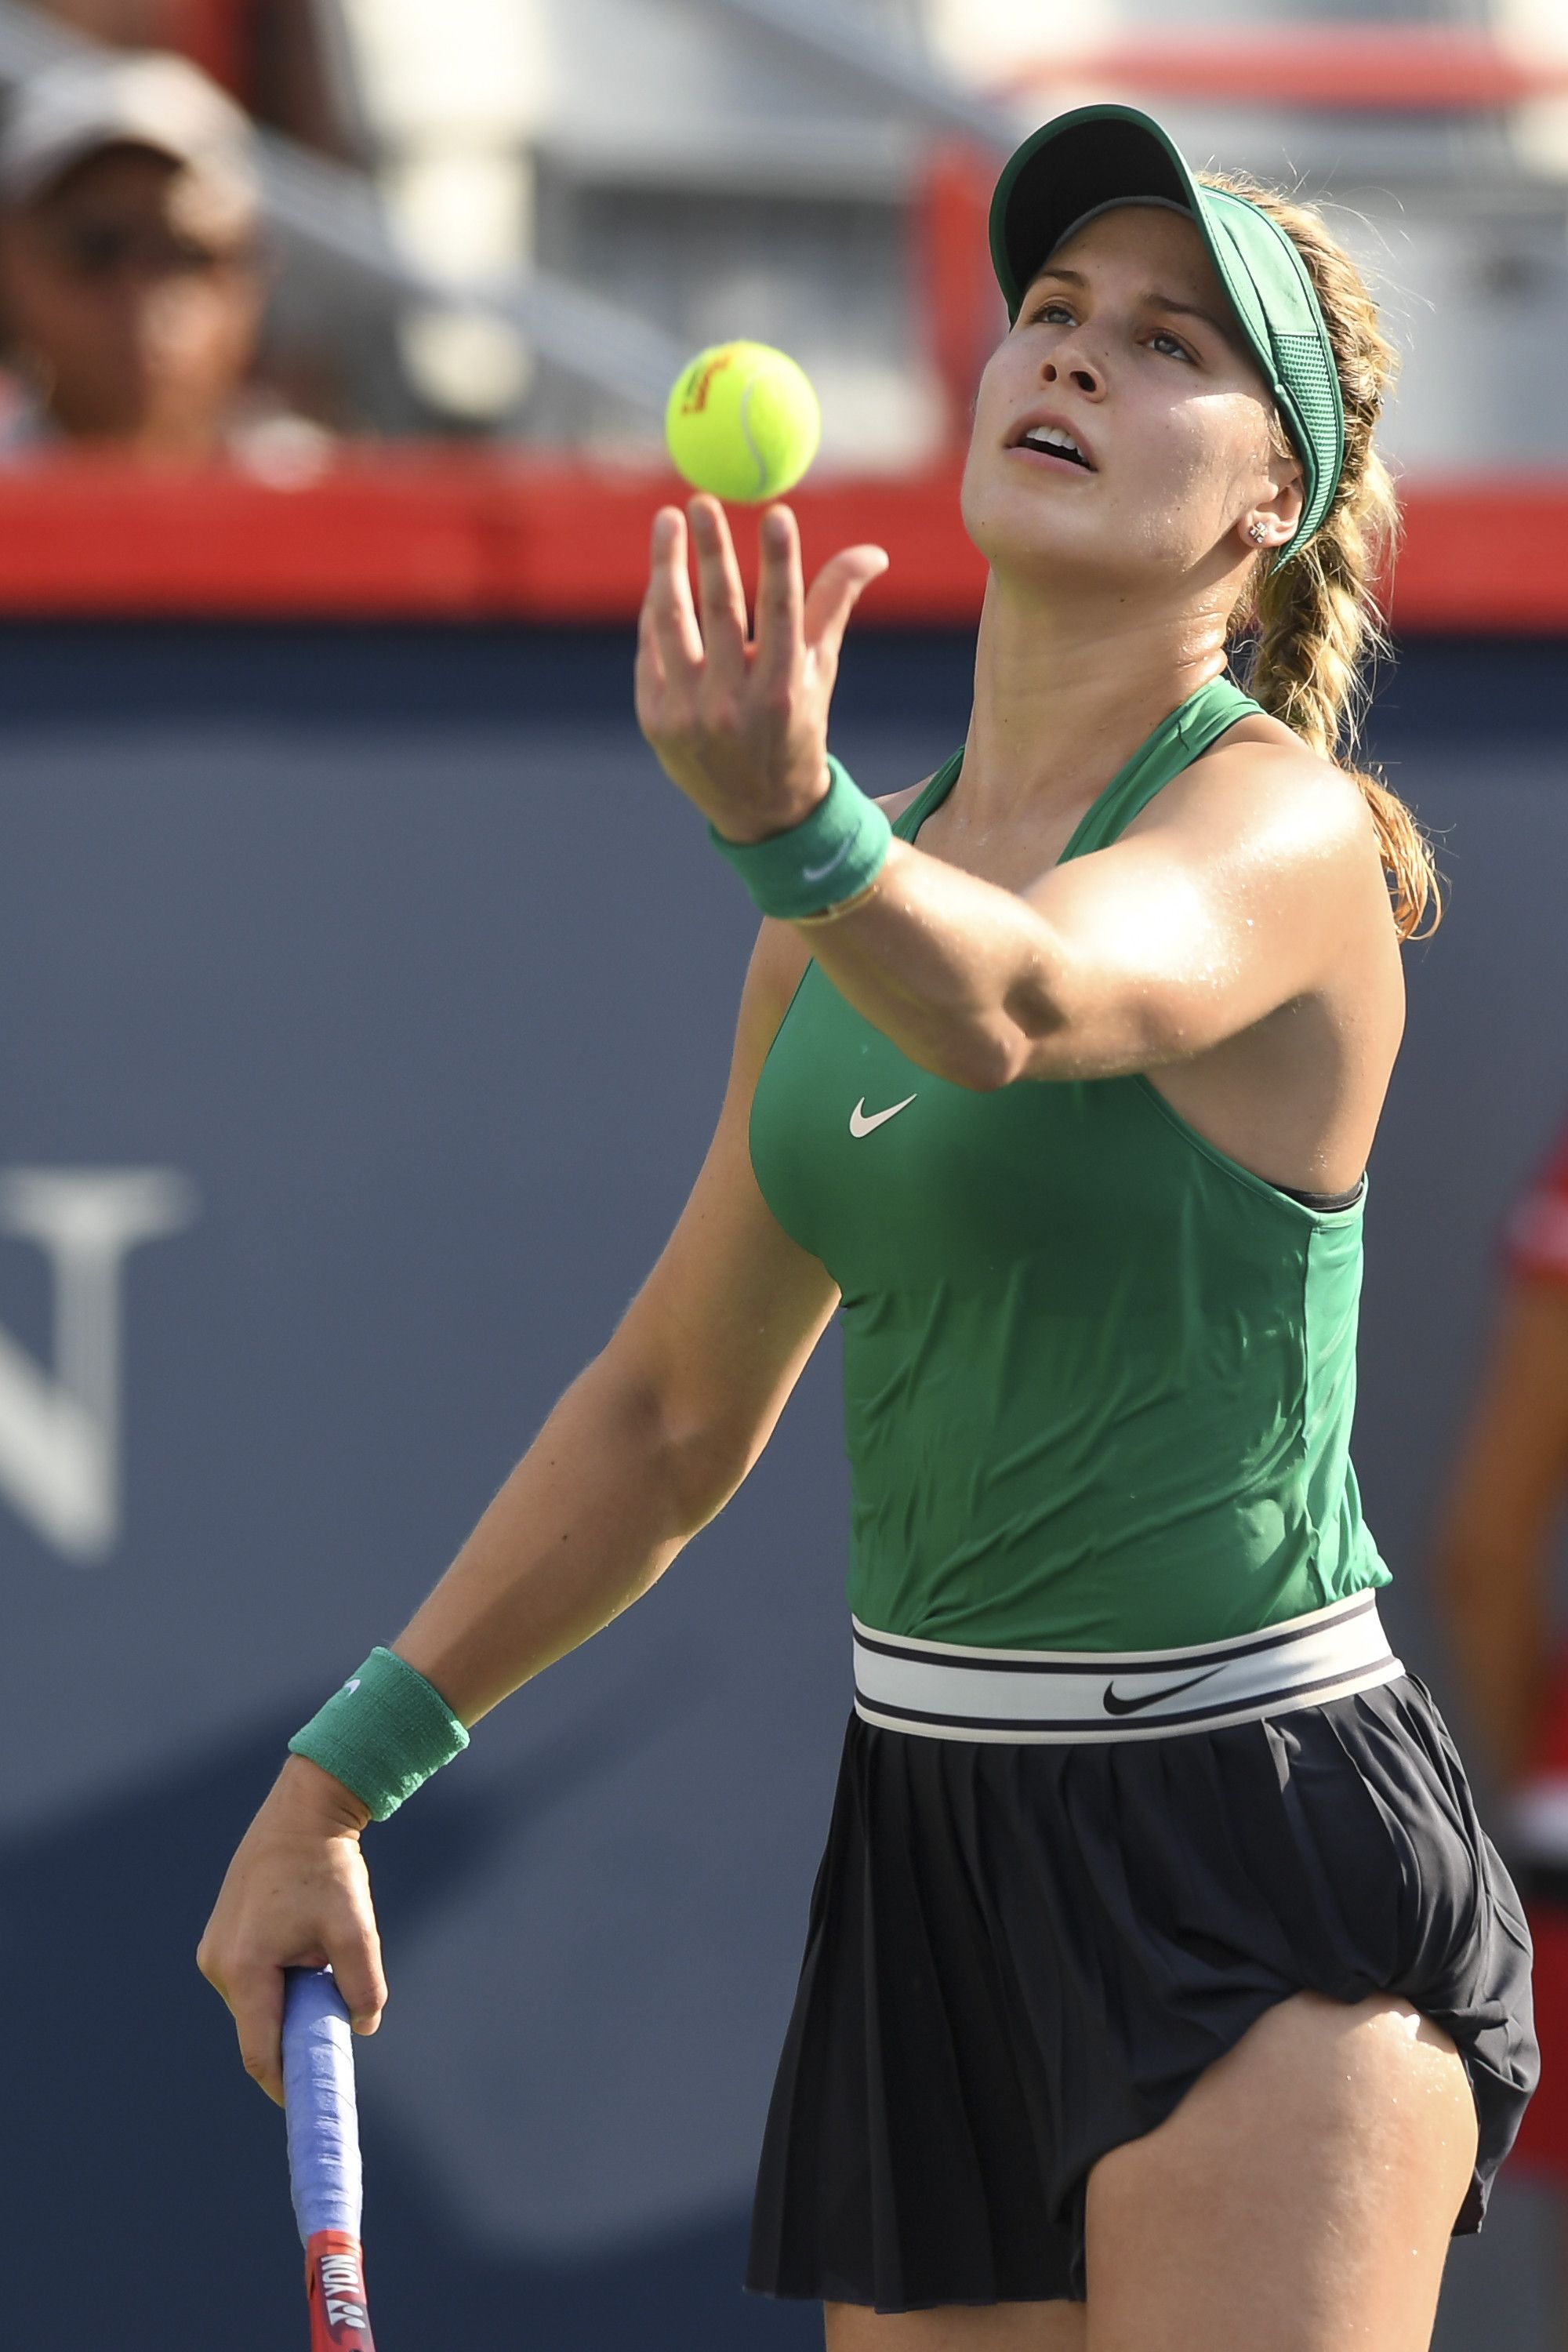 Questions with Eugenie Bouchard